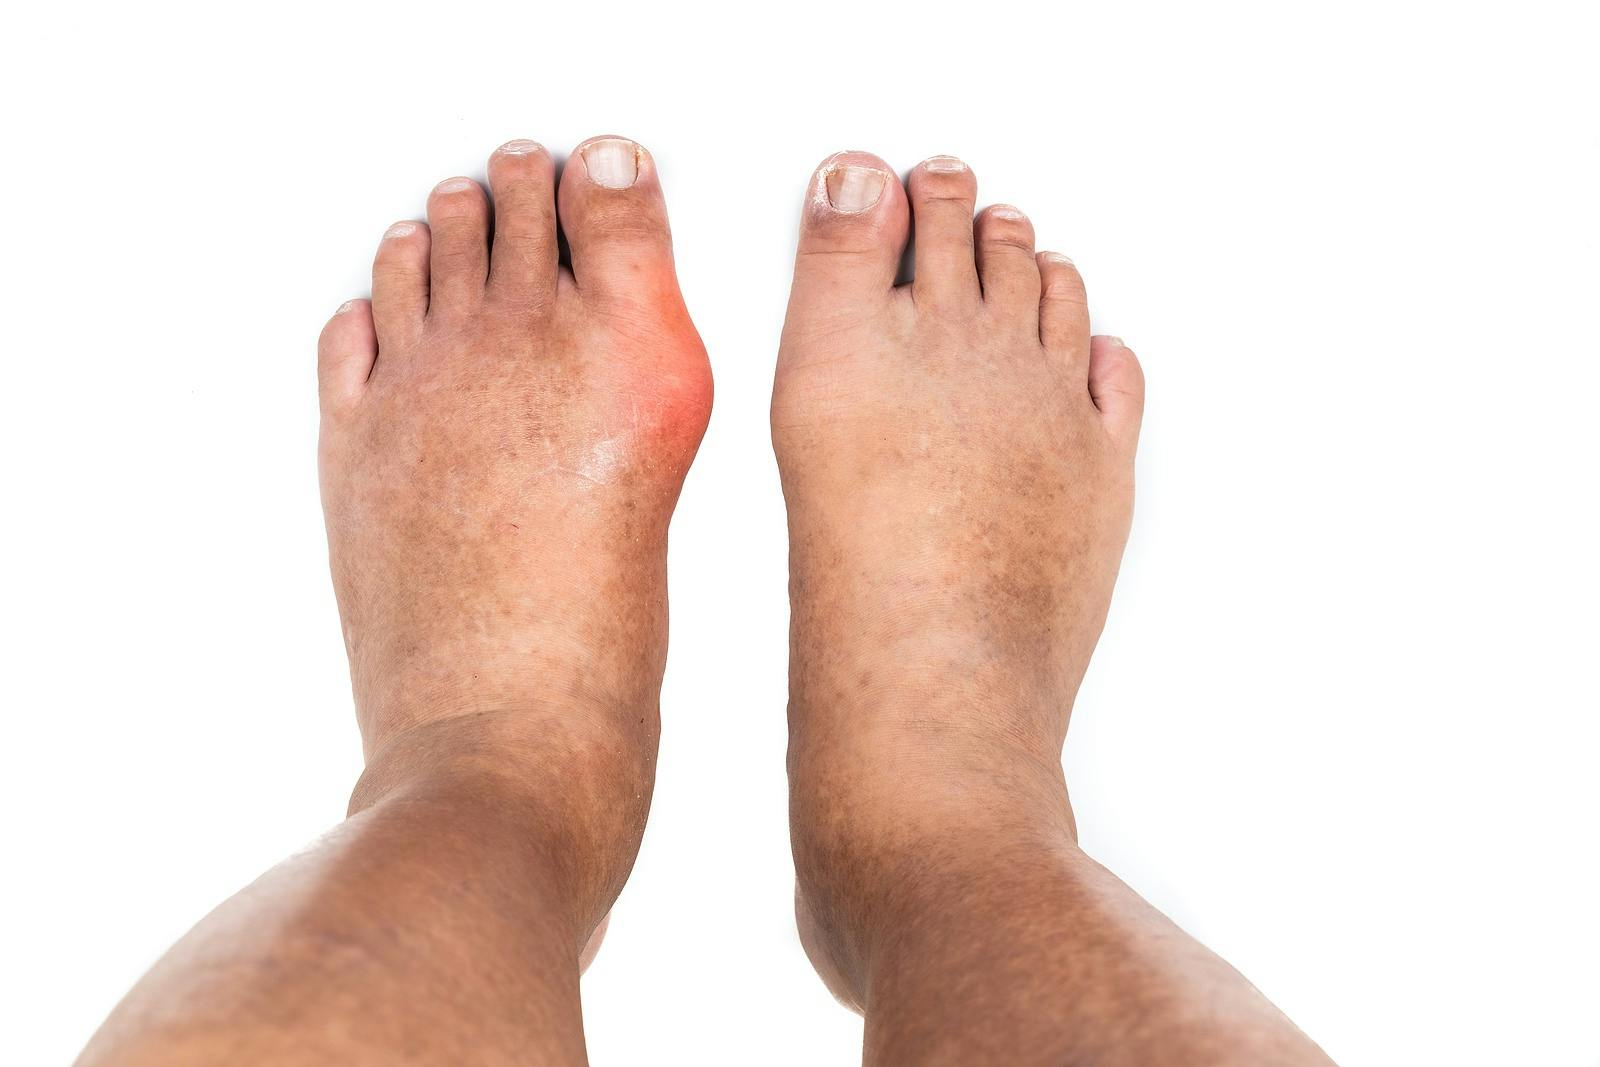 Swollen joint in left foot; man seeks to ease joint pain